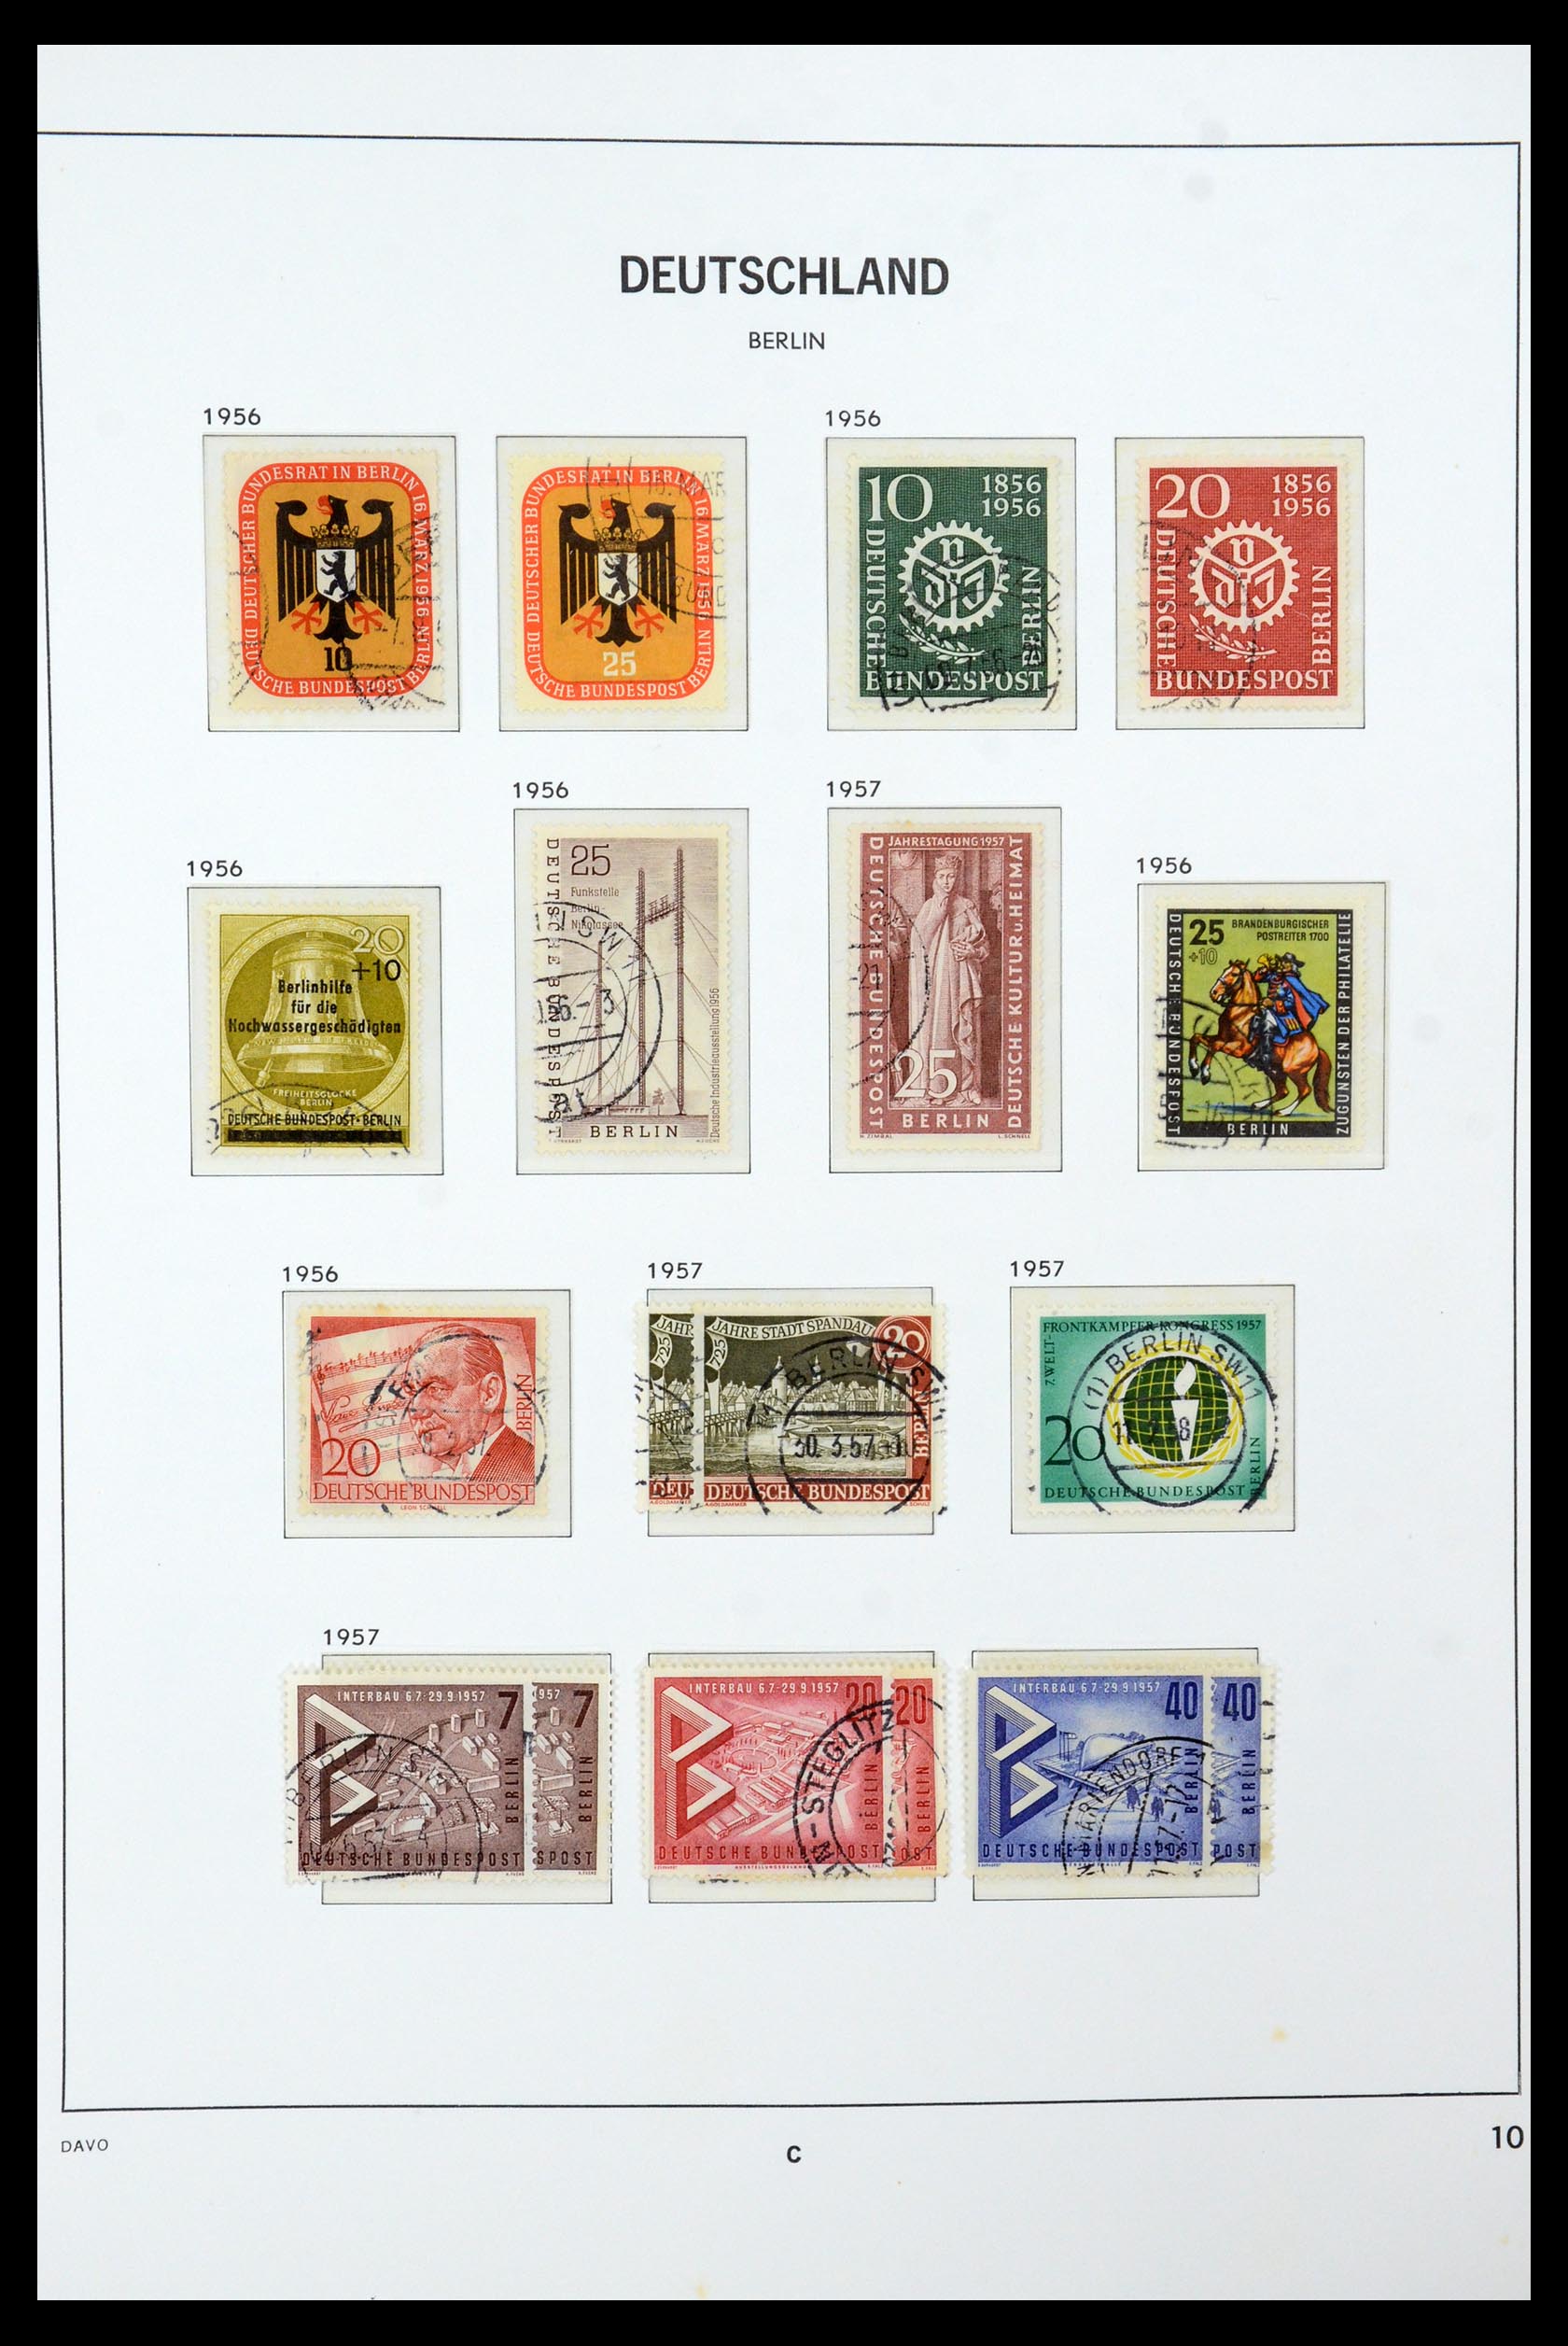 36441 011 - Stamp collection 36441 Berlin 1948-1990.